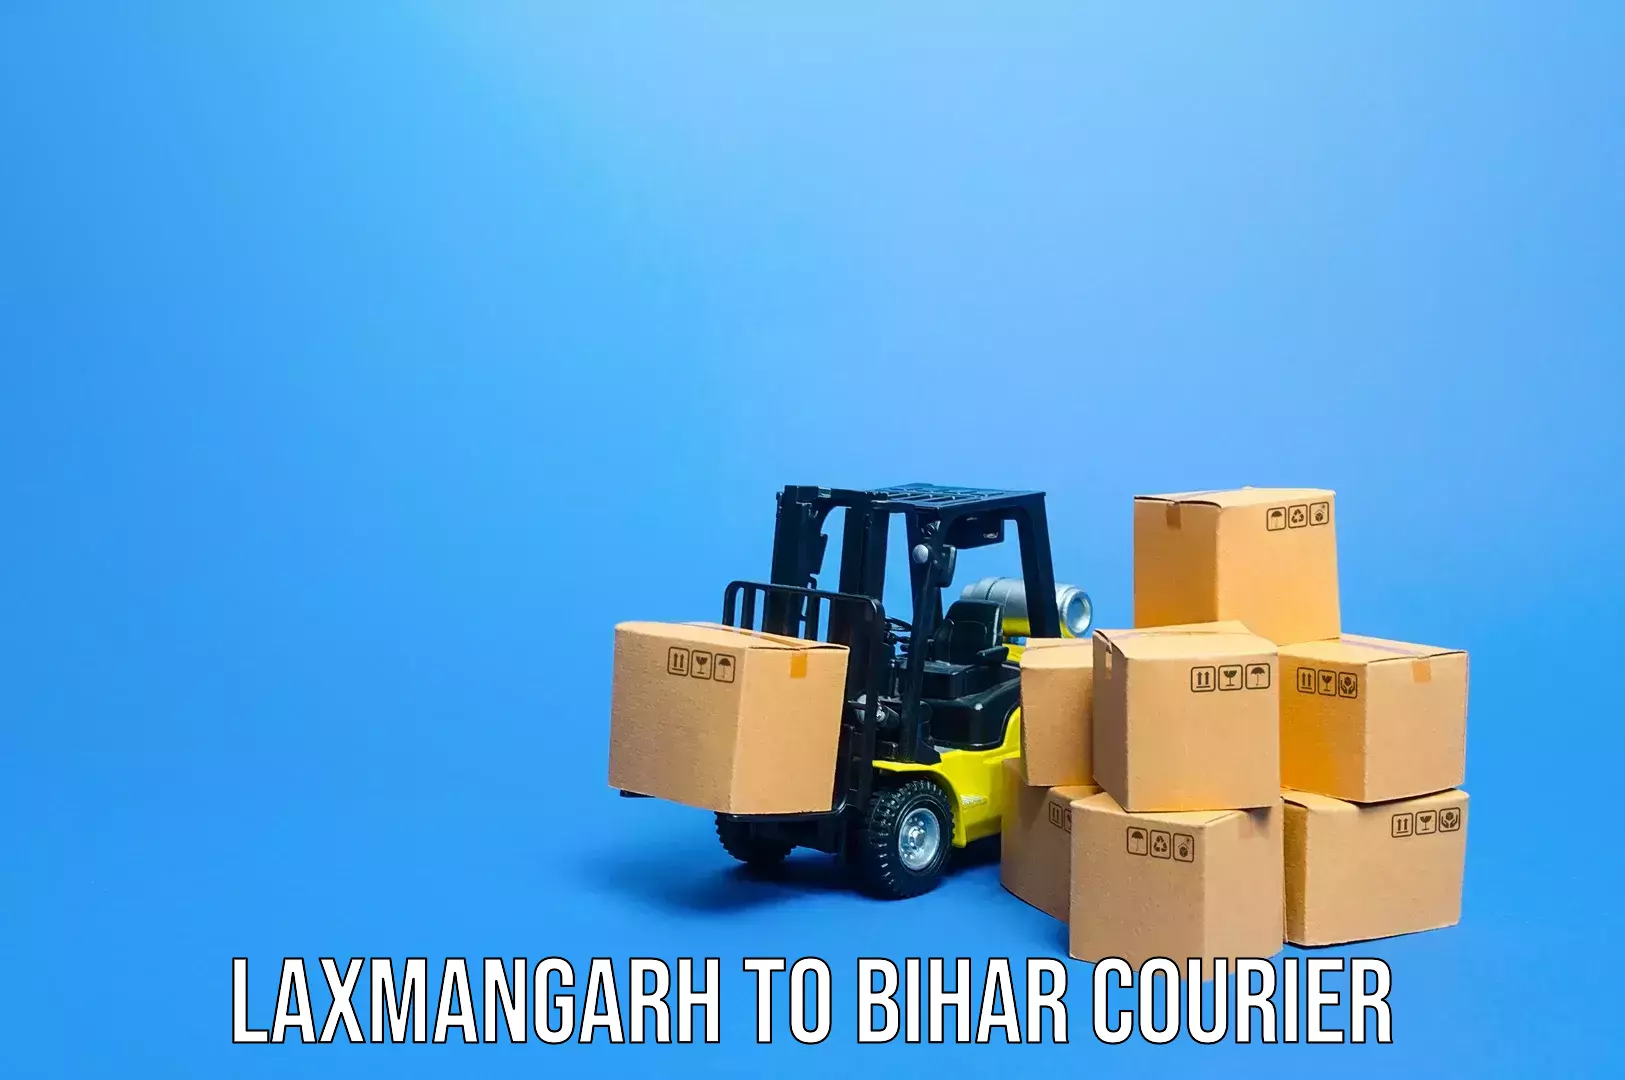 Luggage transport deals in Laxmangarh to Dhaka